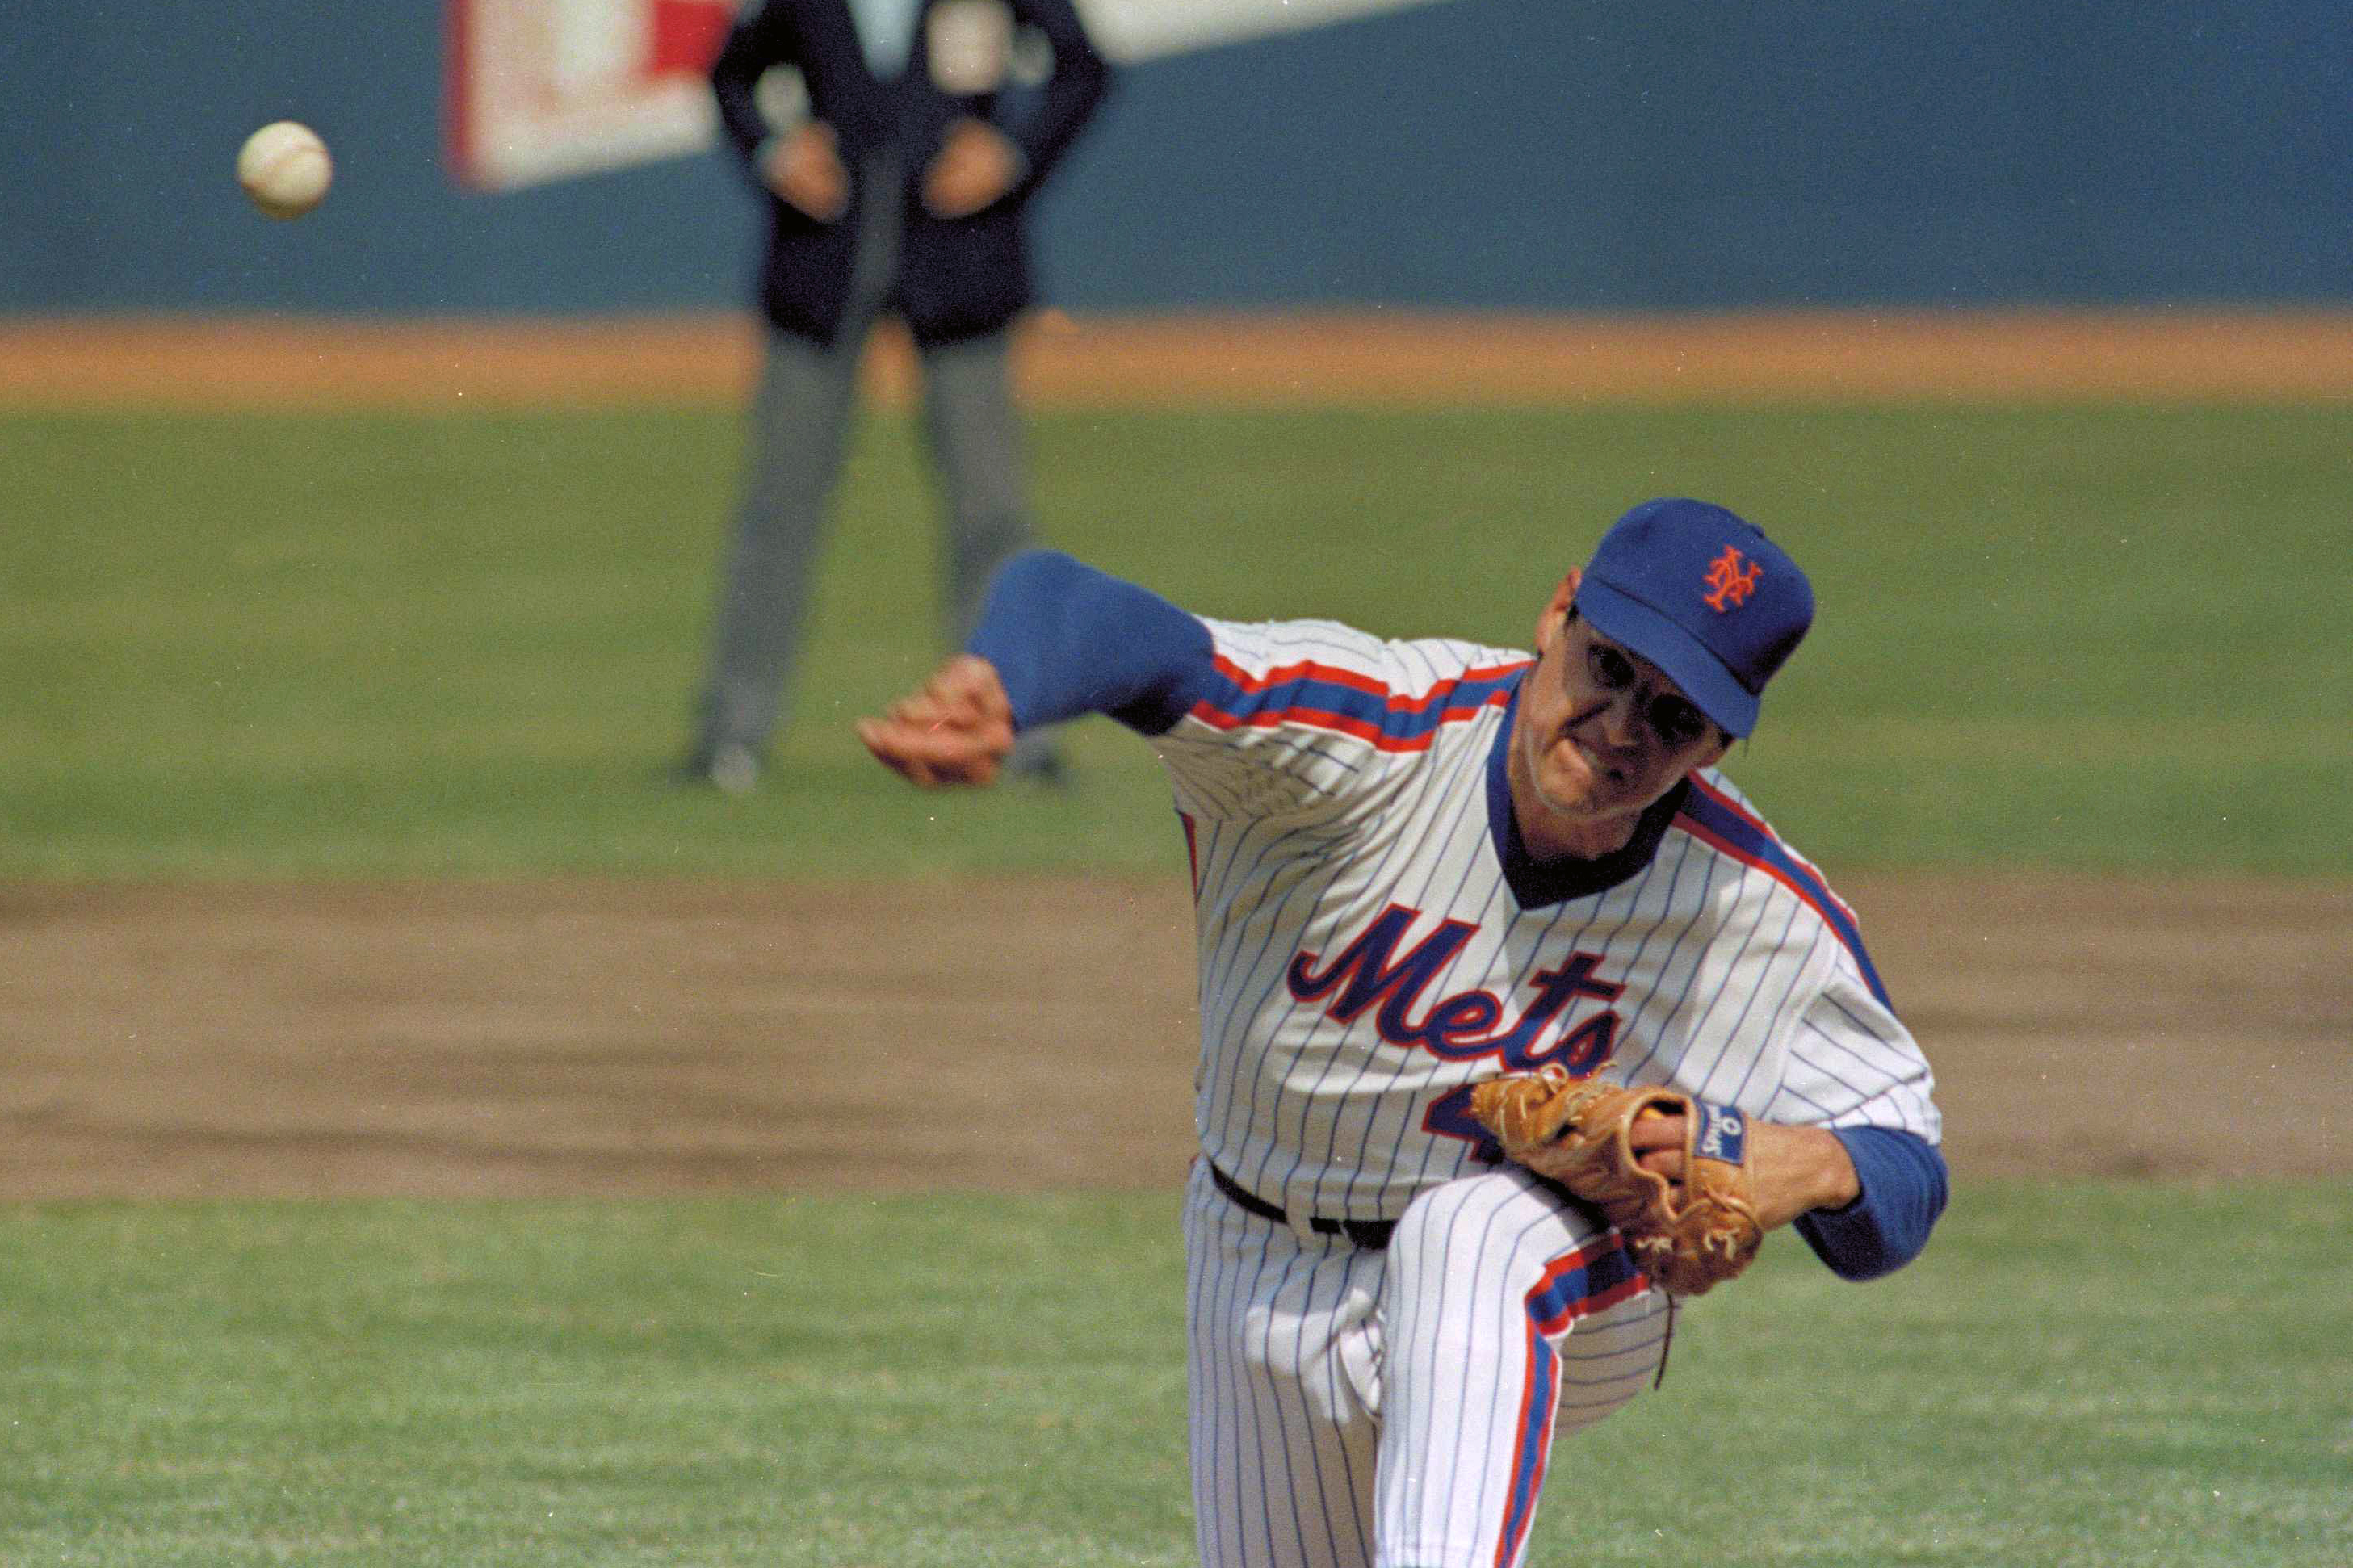 Tom Seaver, Hall of Fame pitcher behind the Miracle Mets, dies aged 75, New York Mets